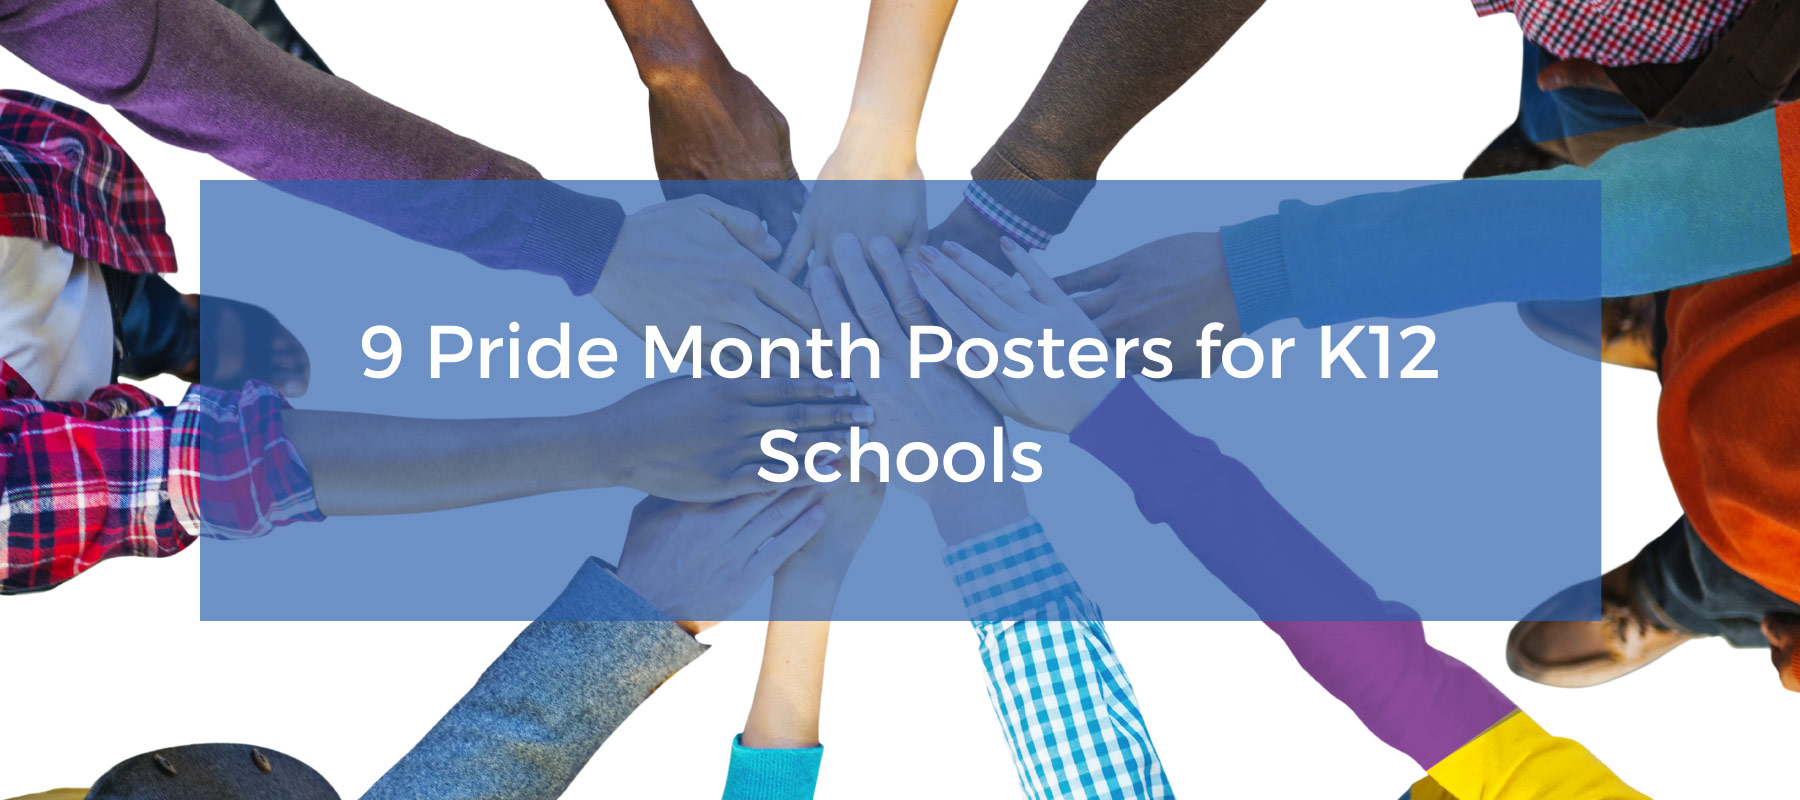 9 Pride Month Posters for K12 Schools